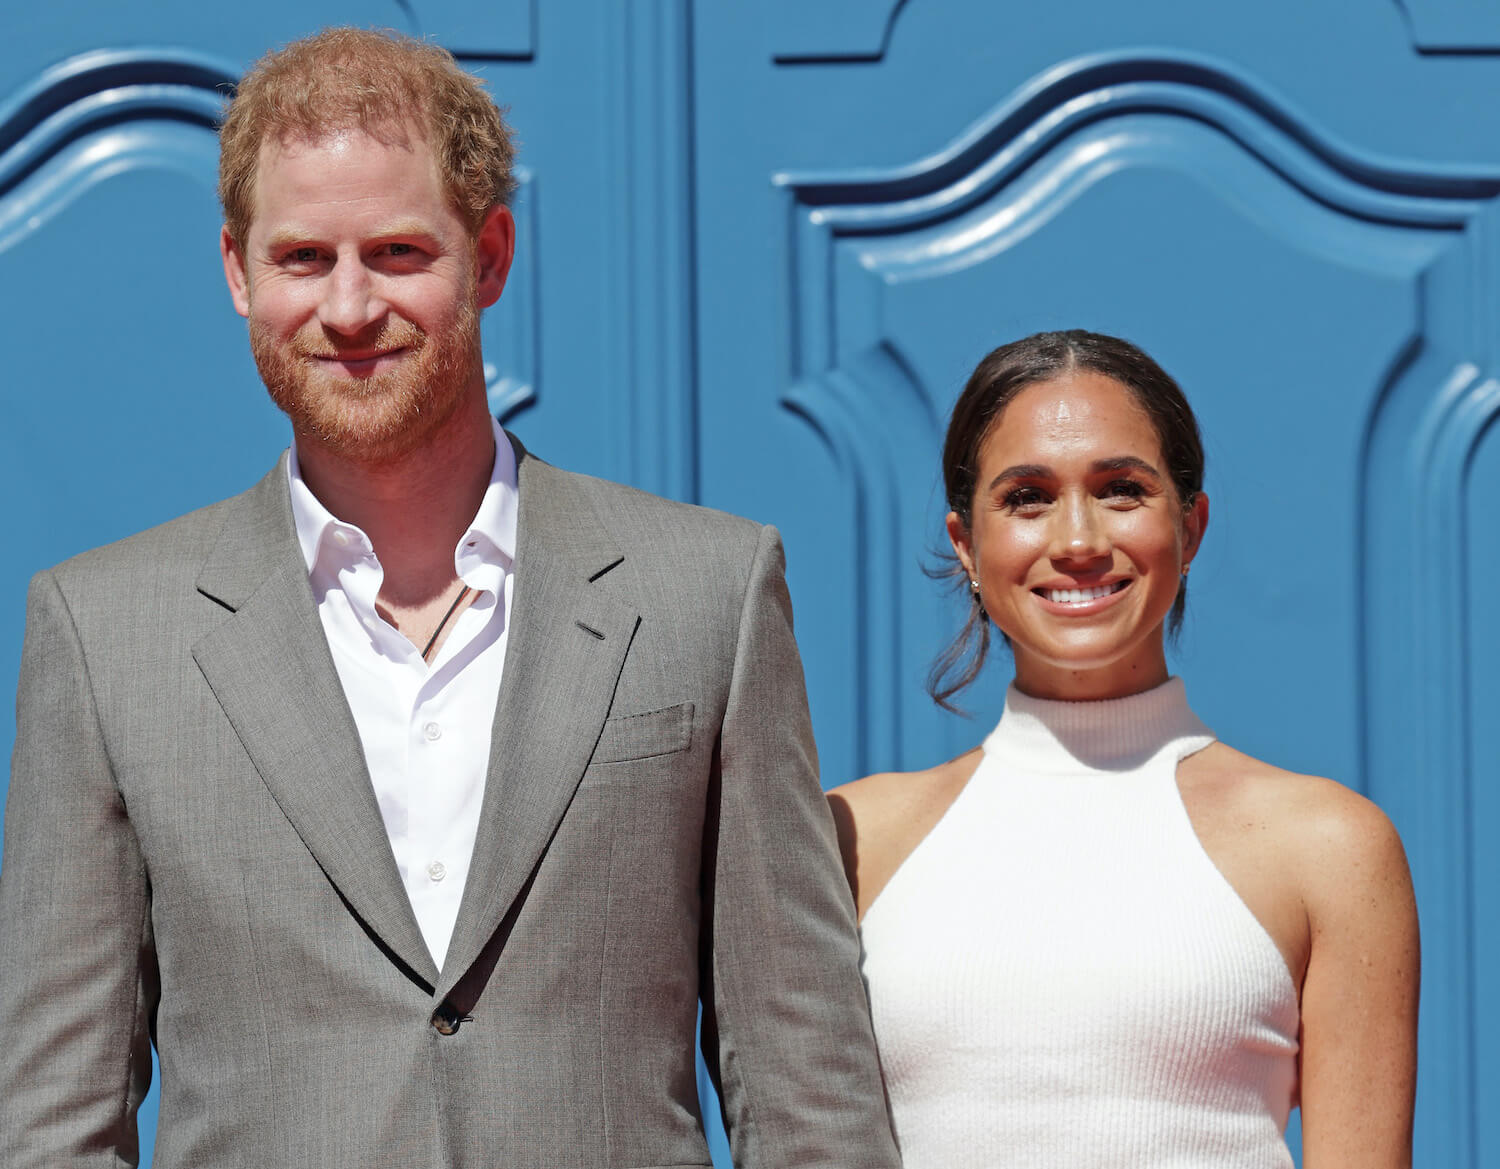 Prince Harry and Meghan Markle smile while standing in front of a blue door, Meghan wearing a white top and Harry wearing a white shirt and jacket